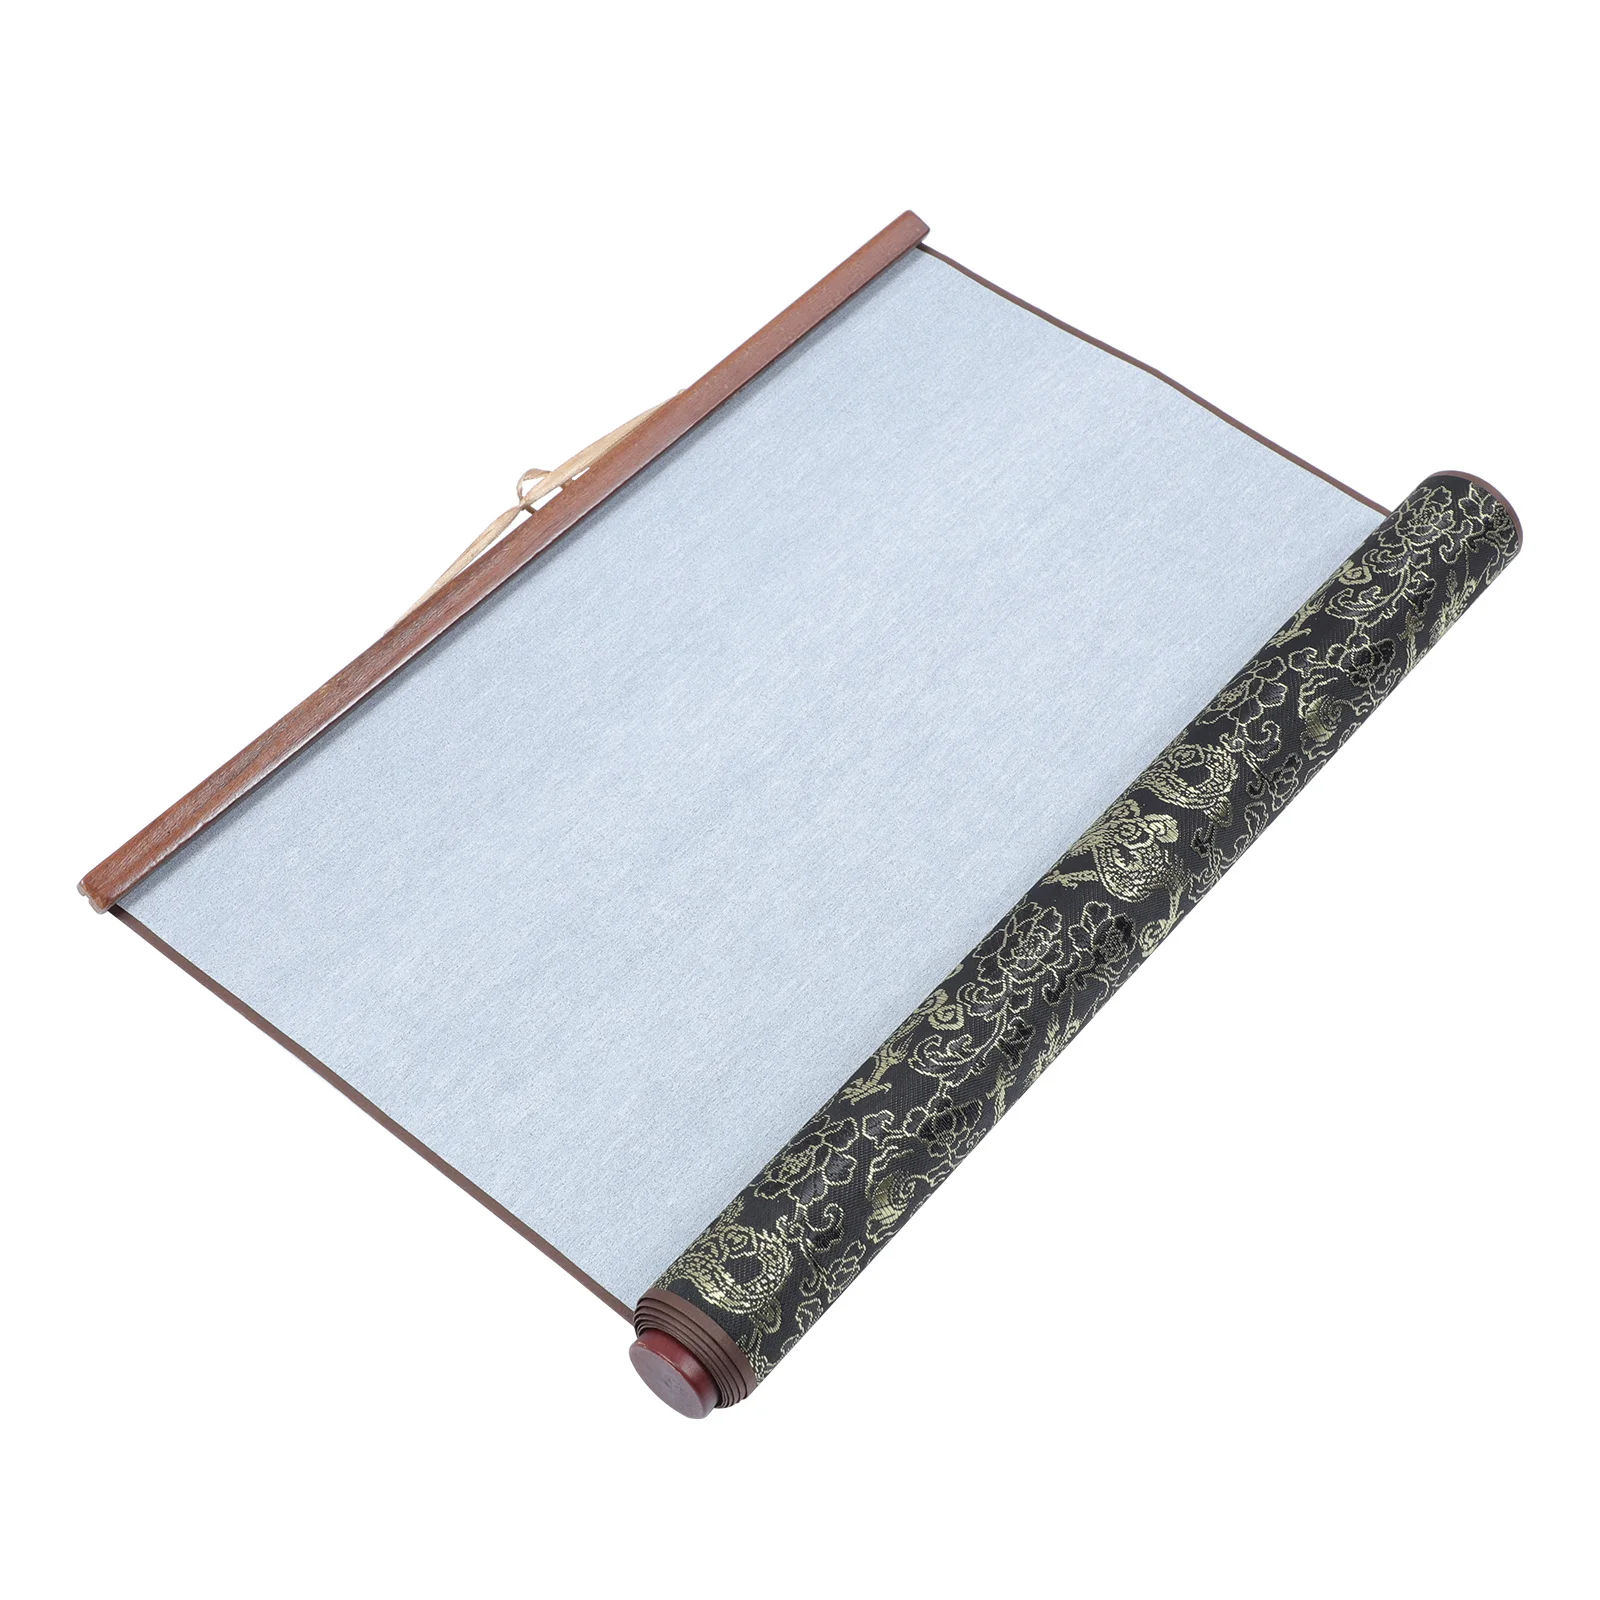 

Calligraphy Water Writing Cloth Supply Scroll Chinese Paper Home Mounting Non-woven Fabric Handwriting Painting